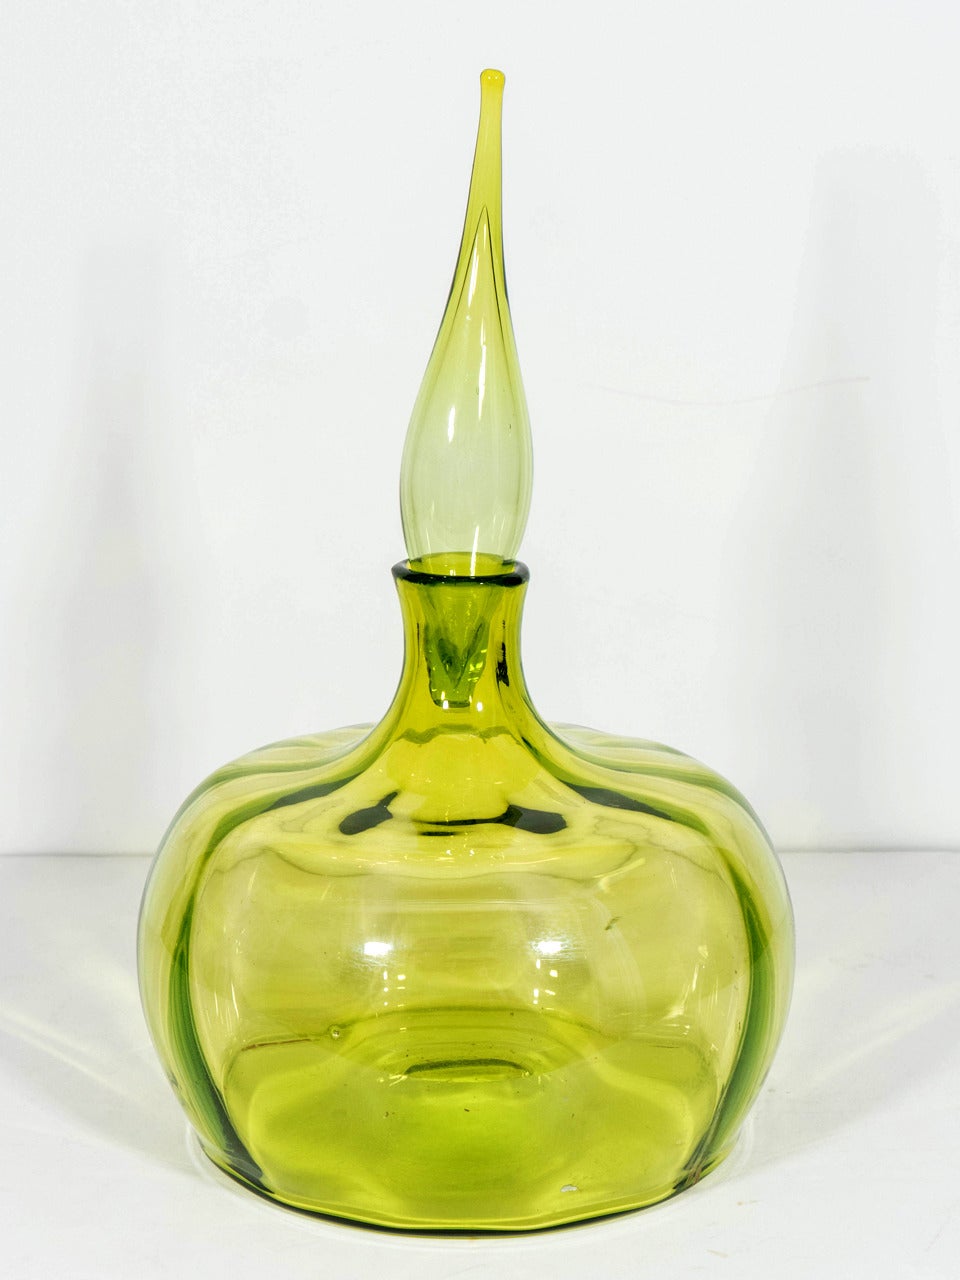 A vintage Blenko # 6417 blown glass pumpkin shaped decanter with tall flame stopper in olive. Designed in 1964 by Joel Myers for the Blenko Glass Co. of Milton, West Virginia. Excellent vintage condition.